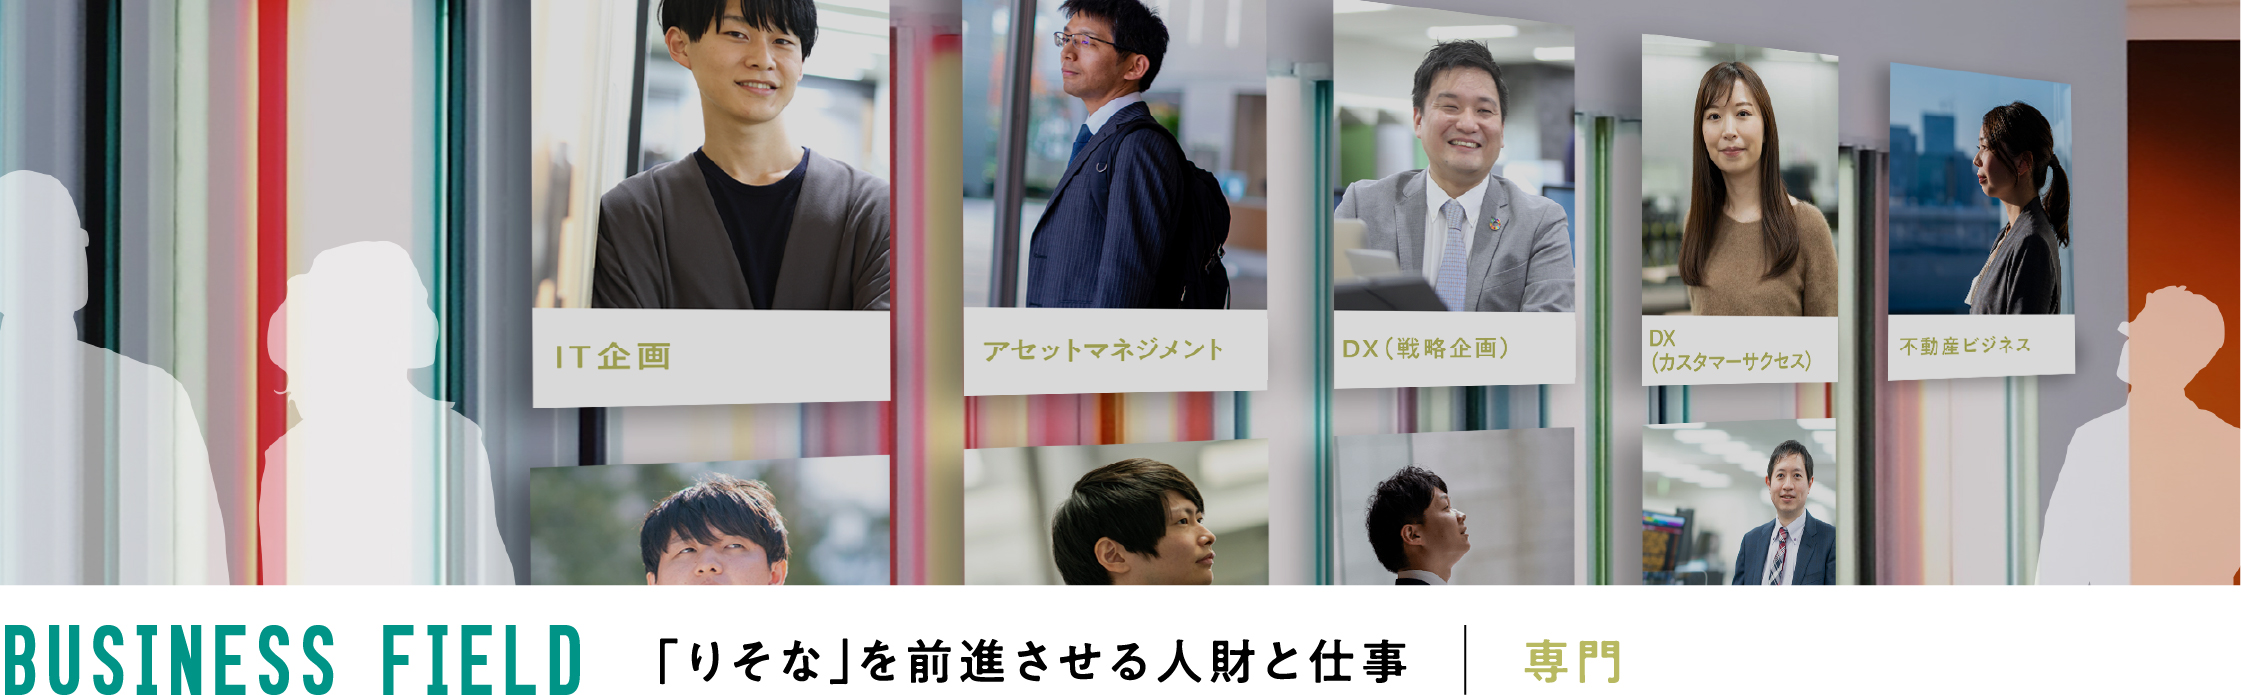 BUSINESS FIELD 「りそな」を前進させる人財と仕事専門職